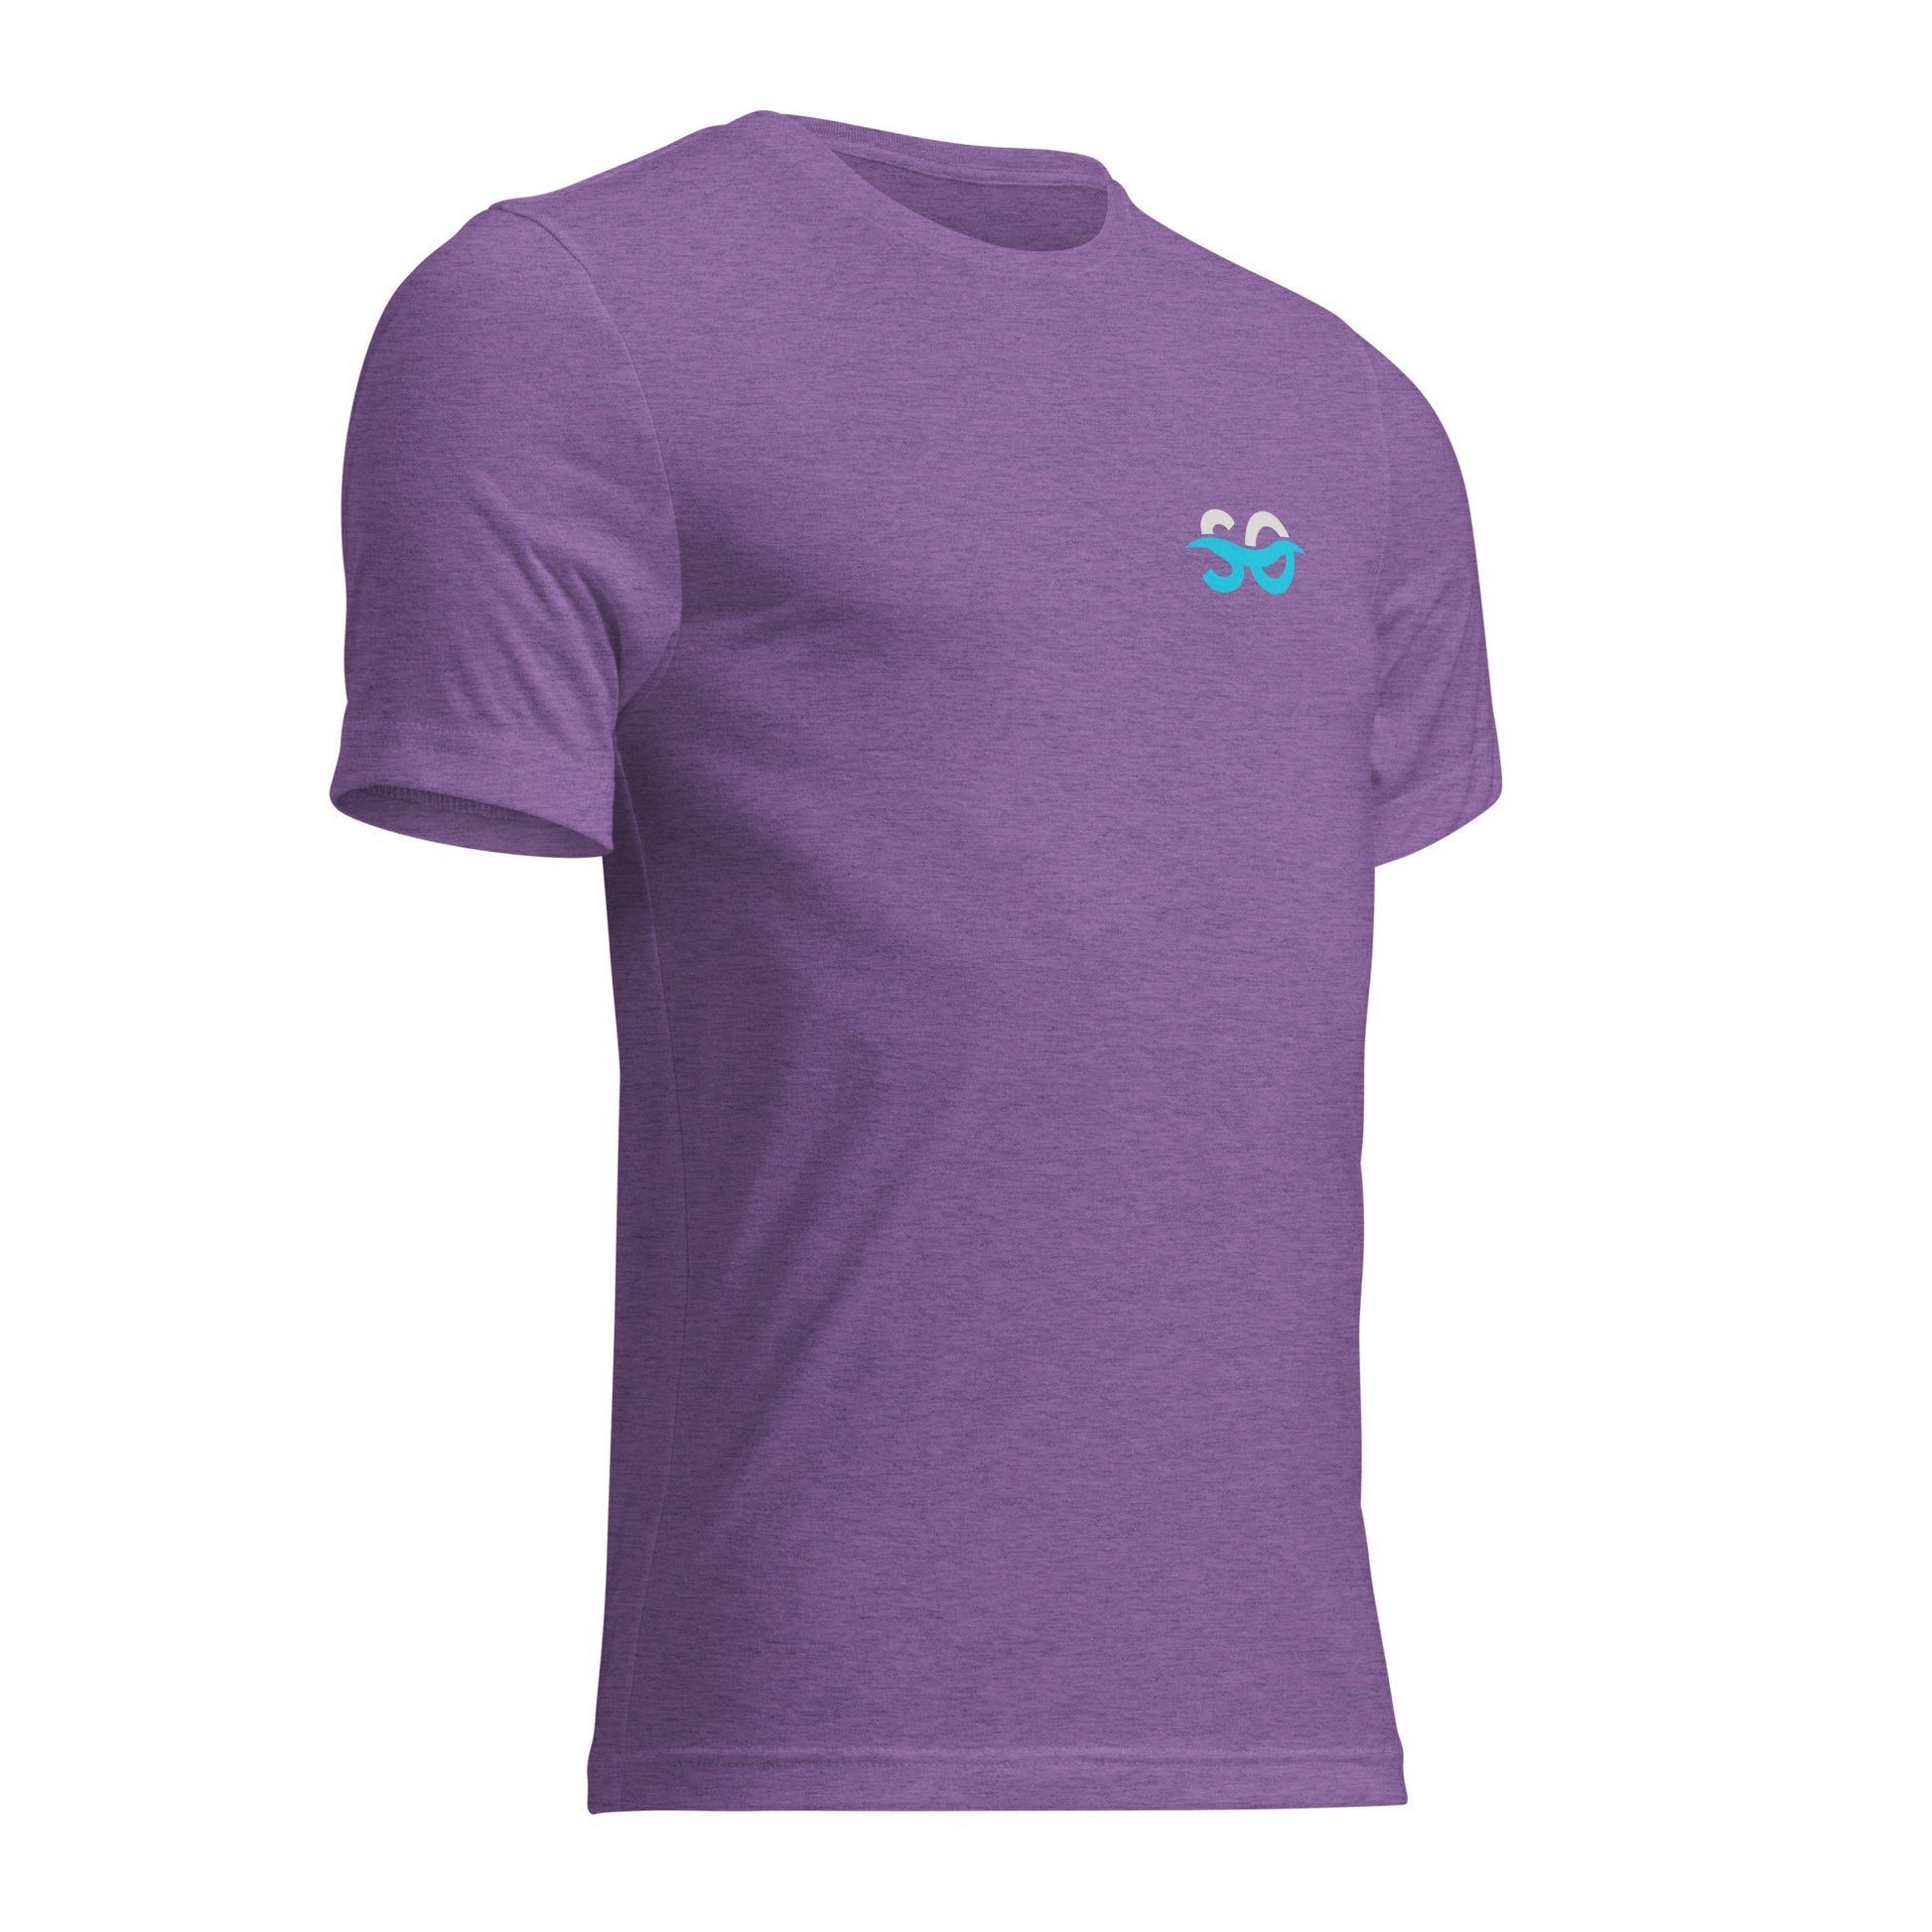 a purple t - shirt with blue numbers on the chest